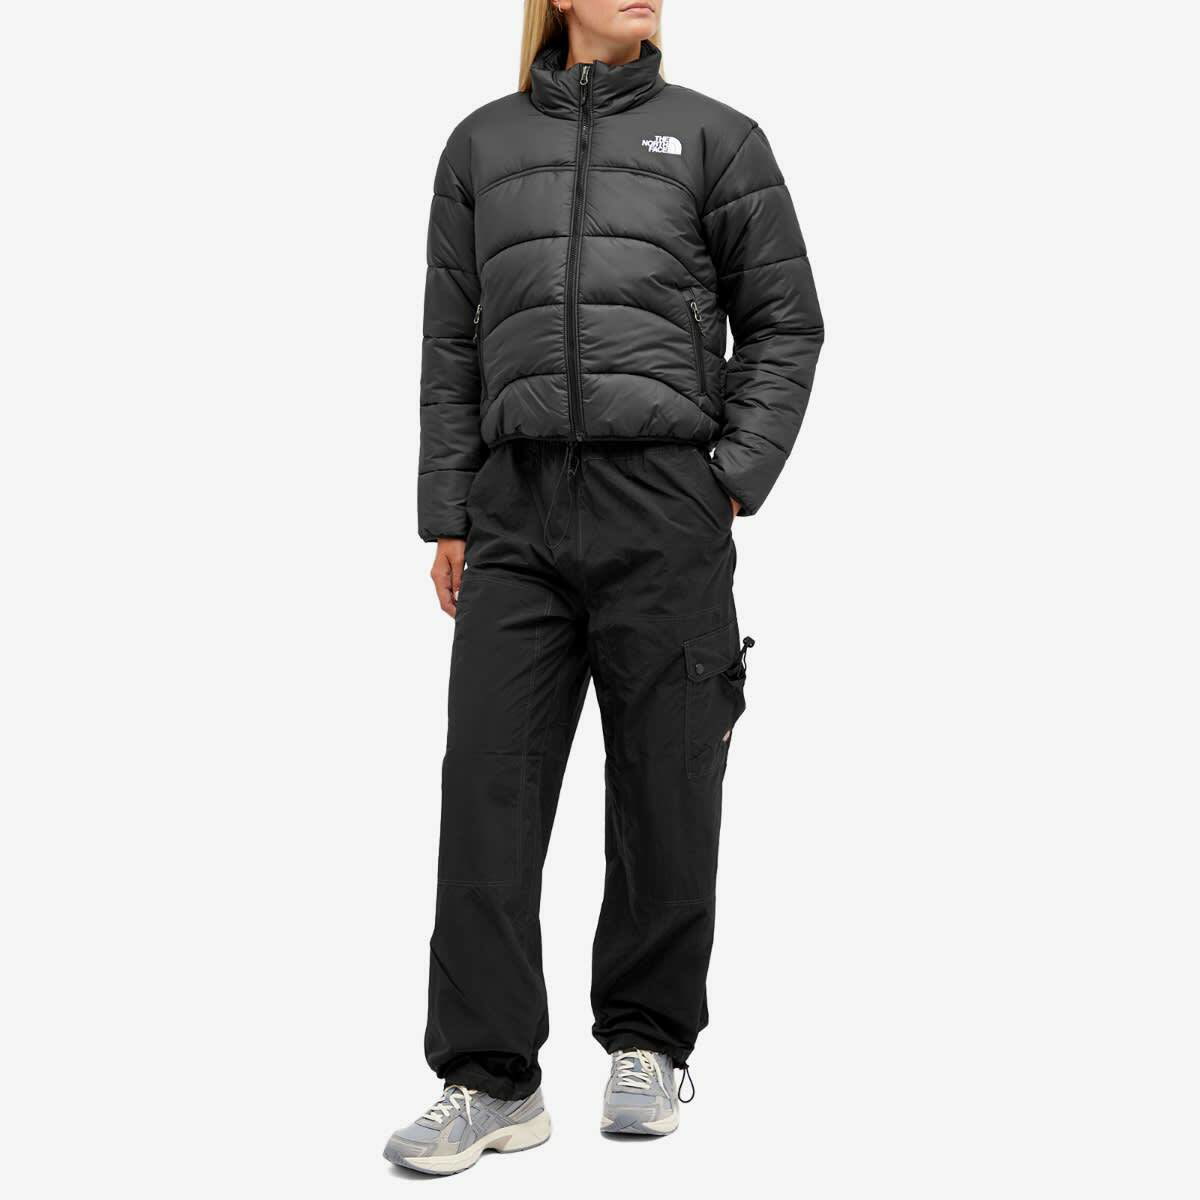 The North Face: Black RMST Steep Tech Jacket